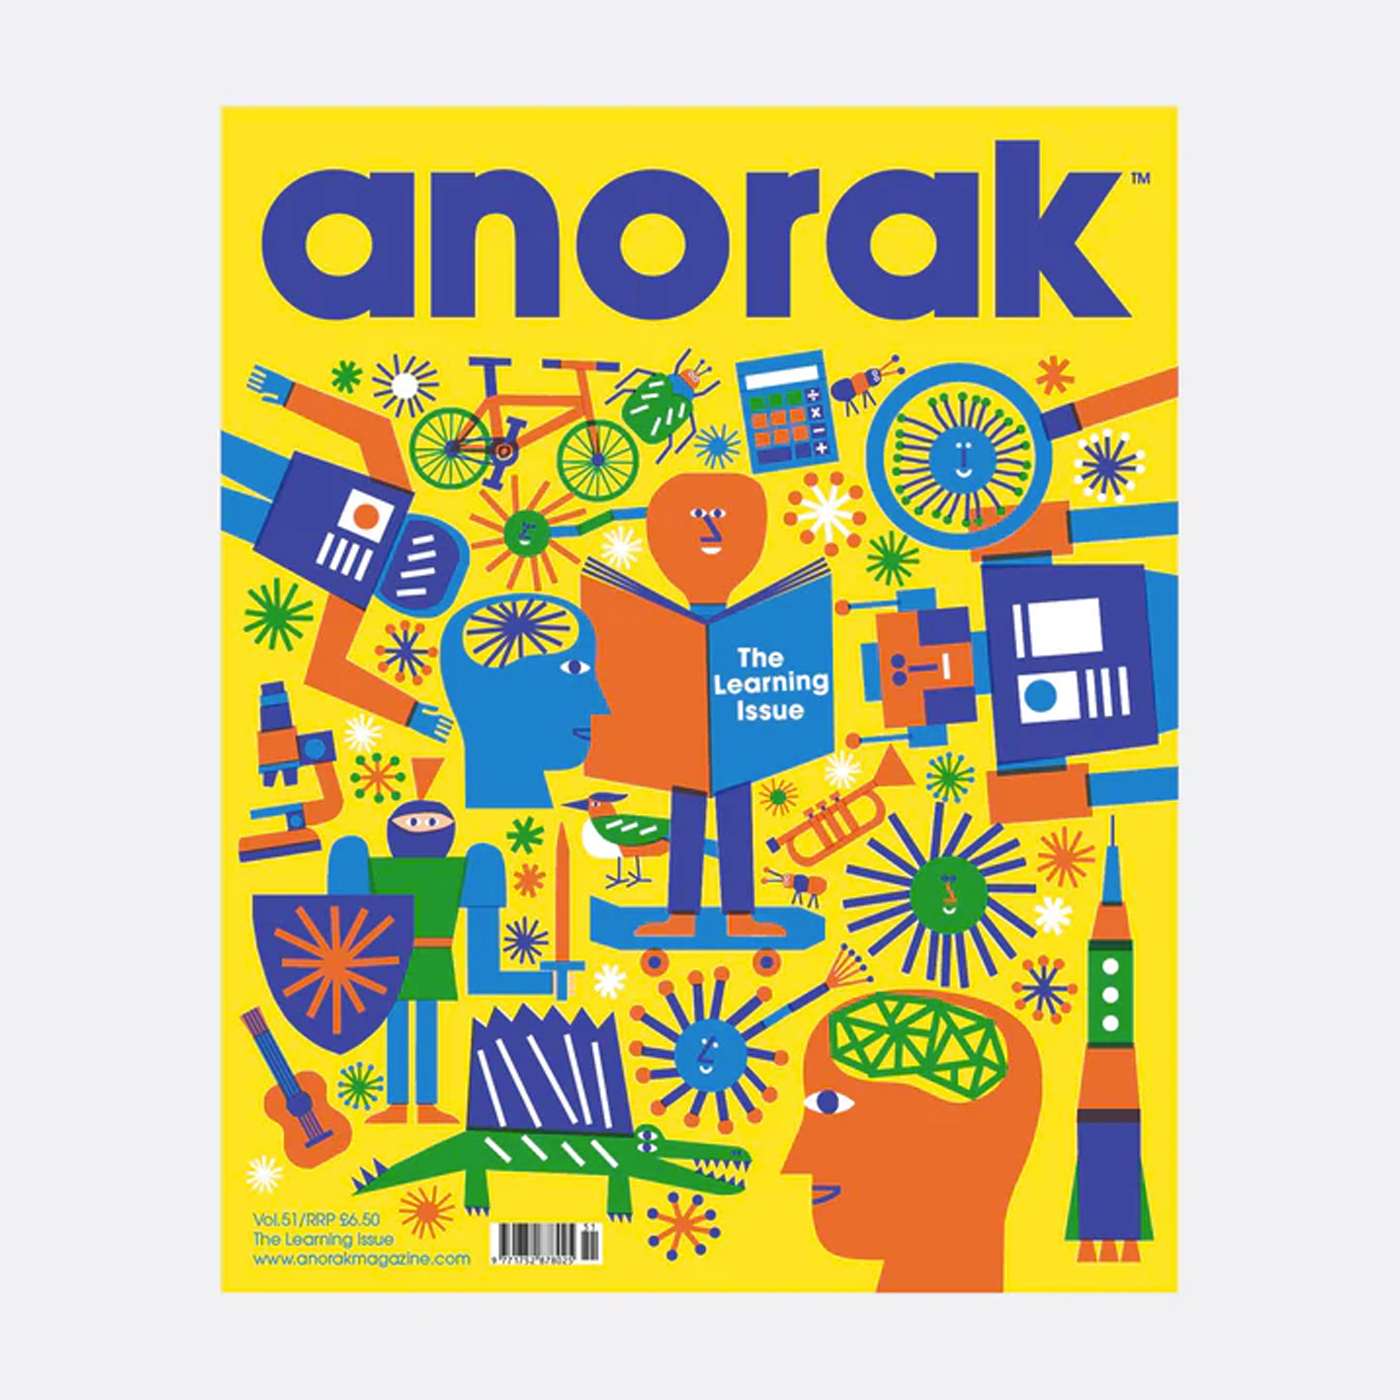  Anorak - The Learning Issue Vol.51